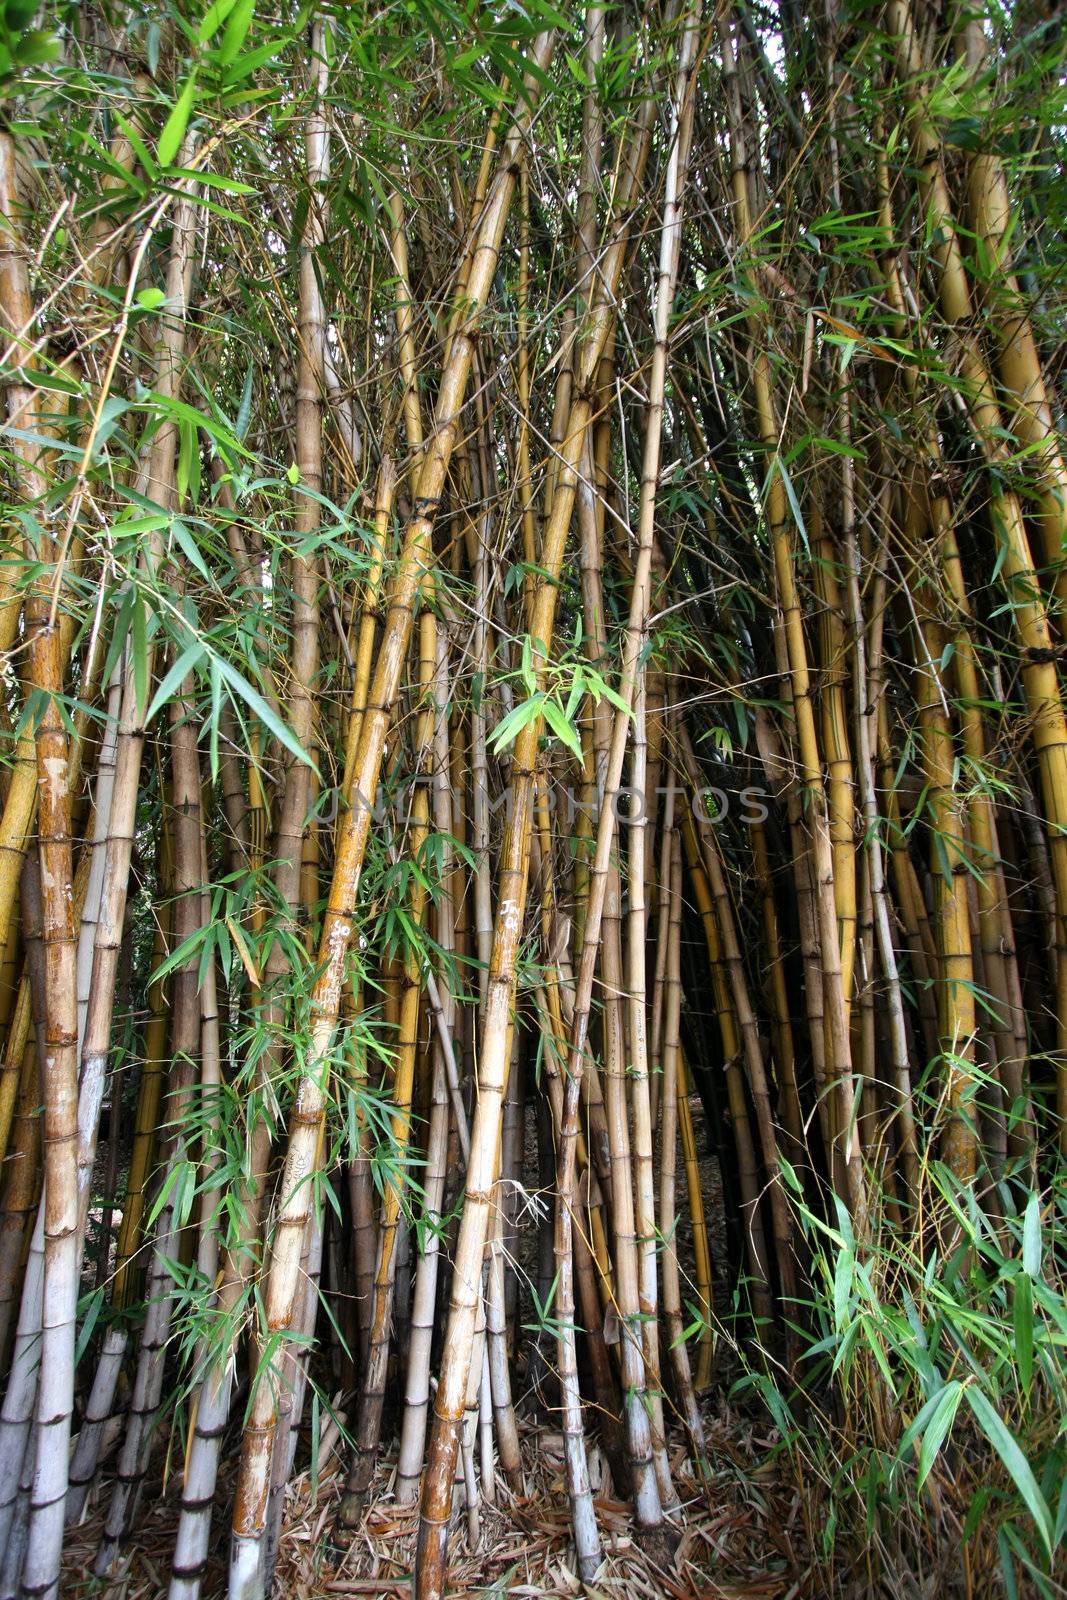 Bamboo trees in a dense forest